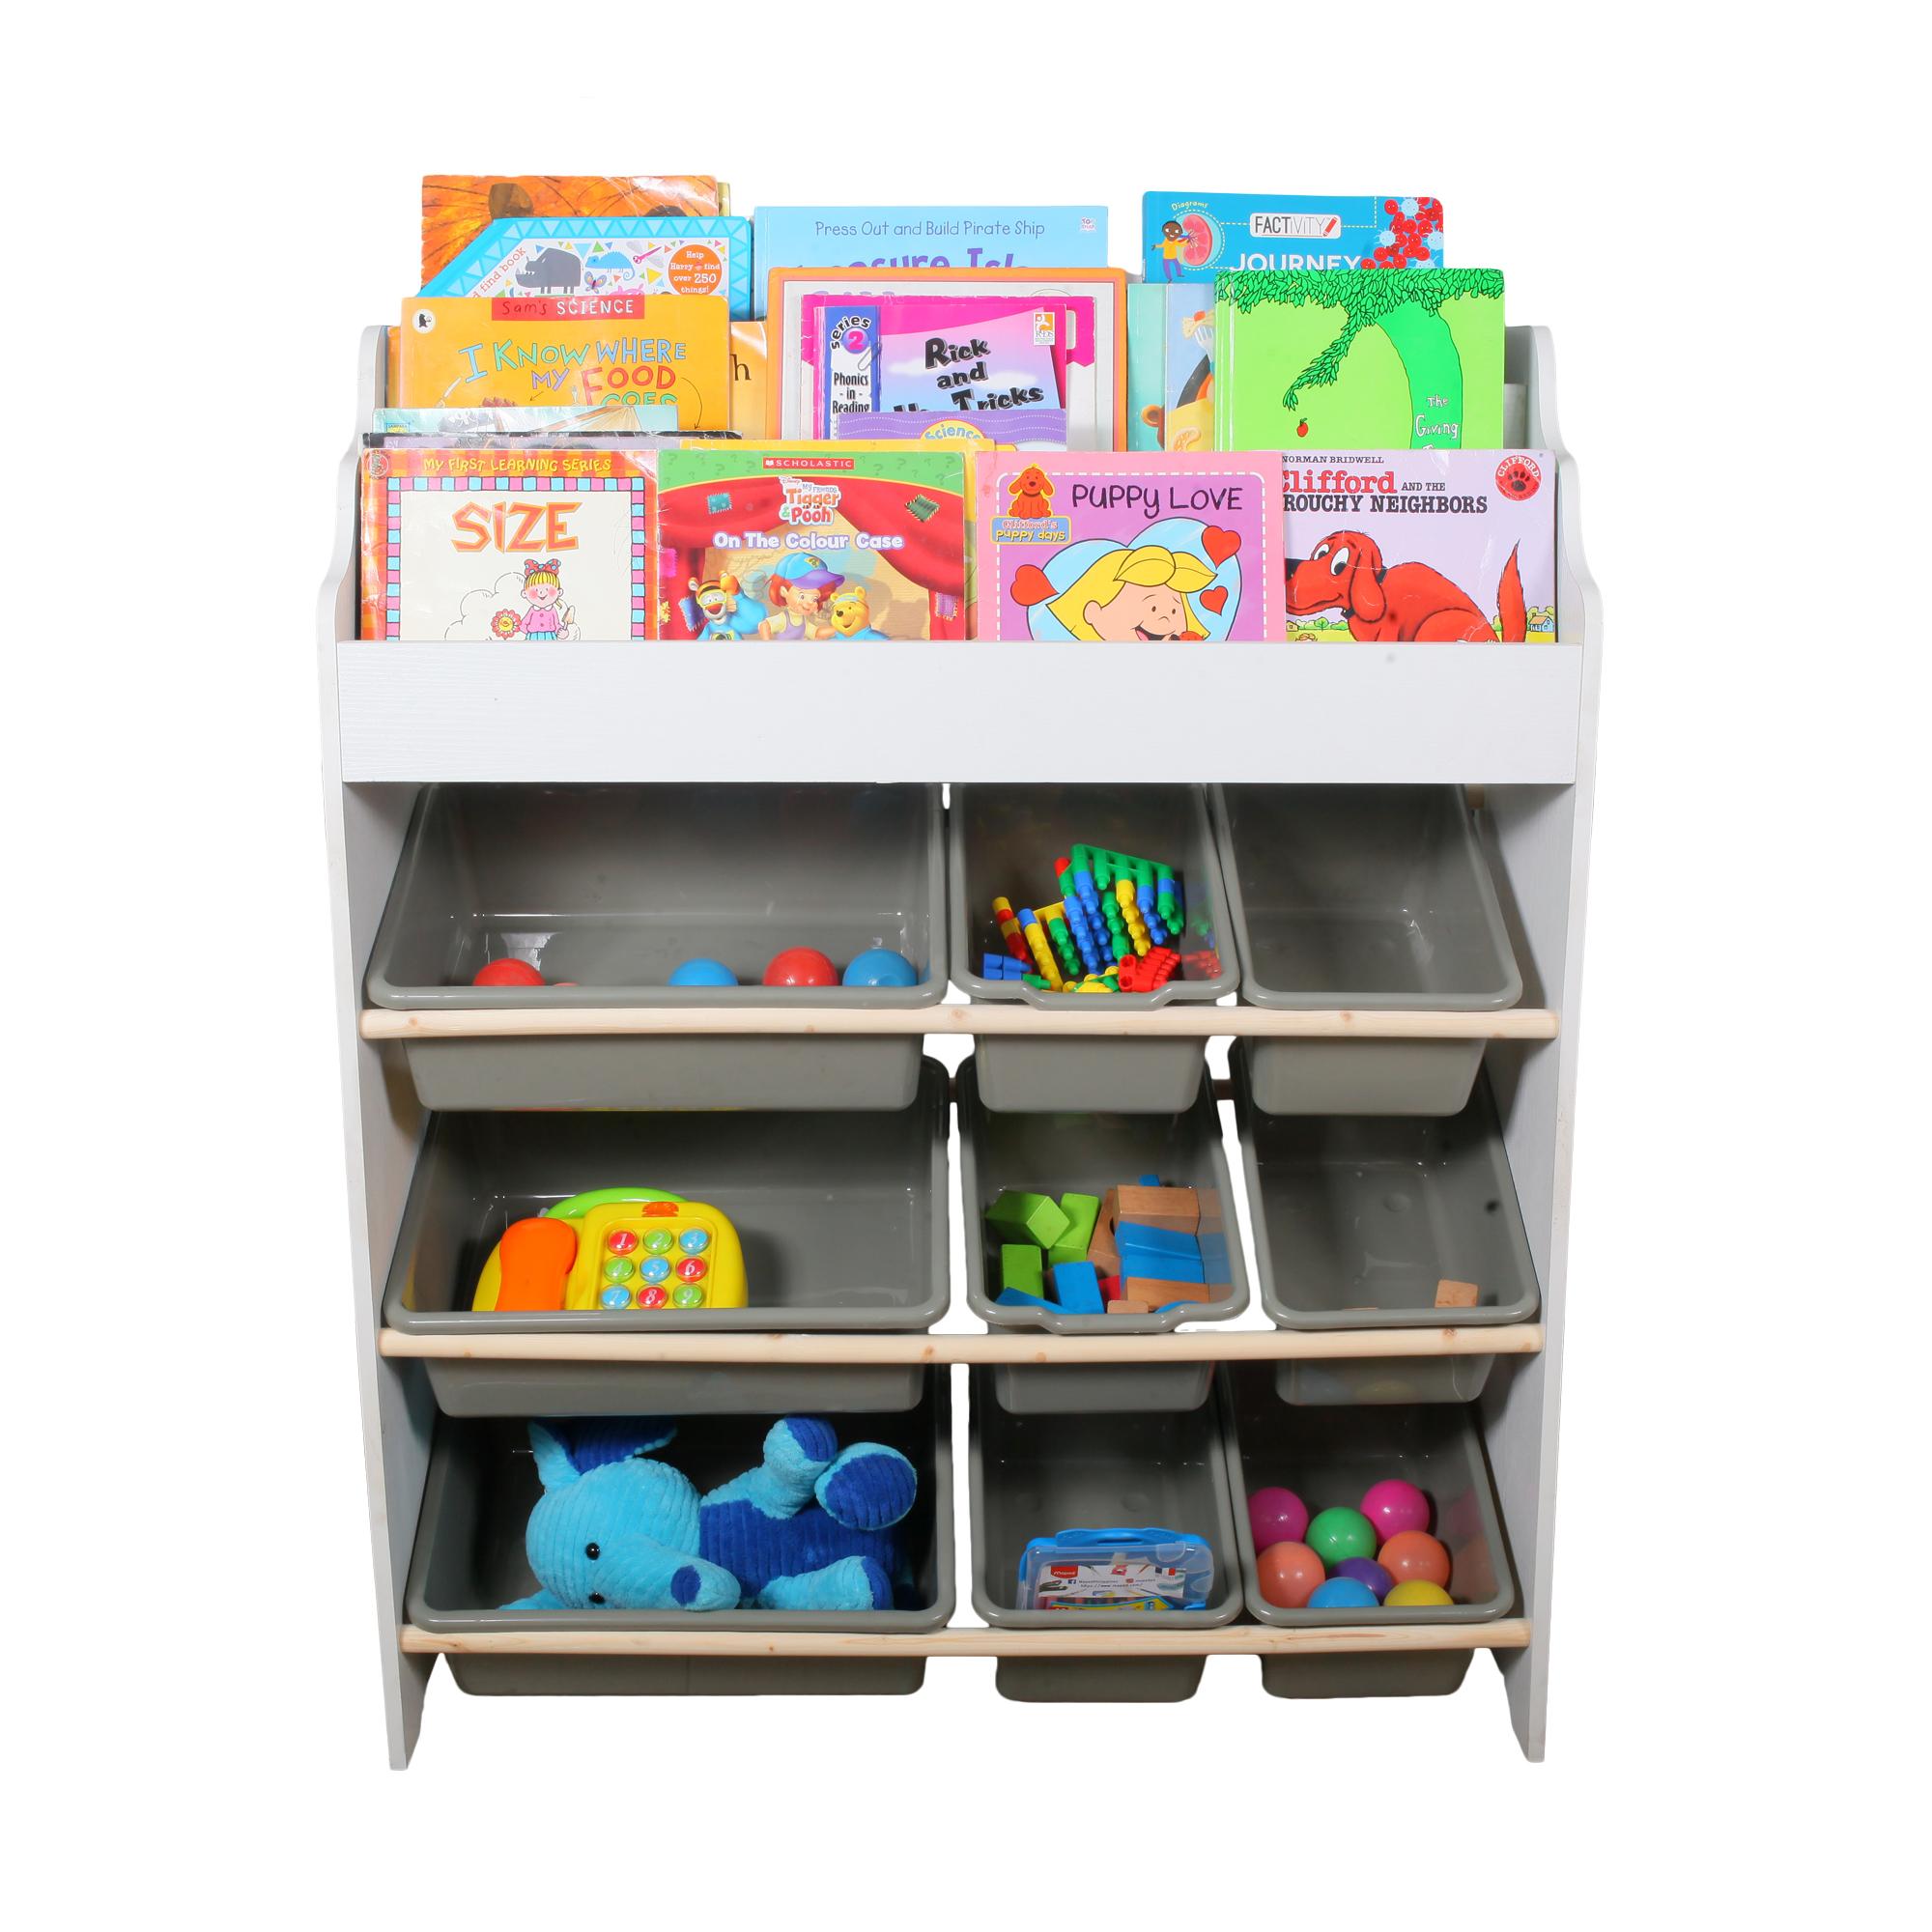 Buy Kids Bookcases Shelving At Best Price Online Lazada Com Ph